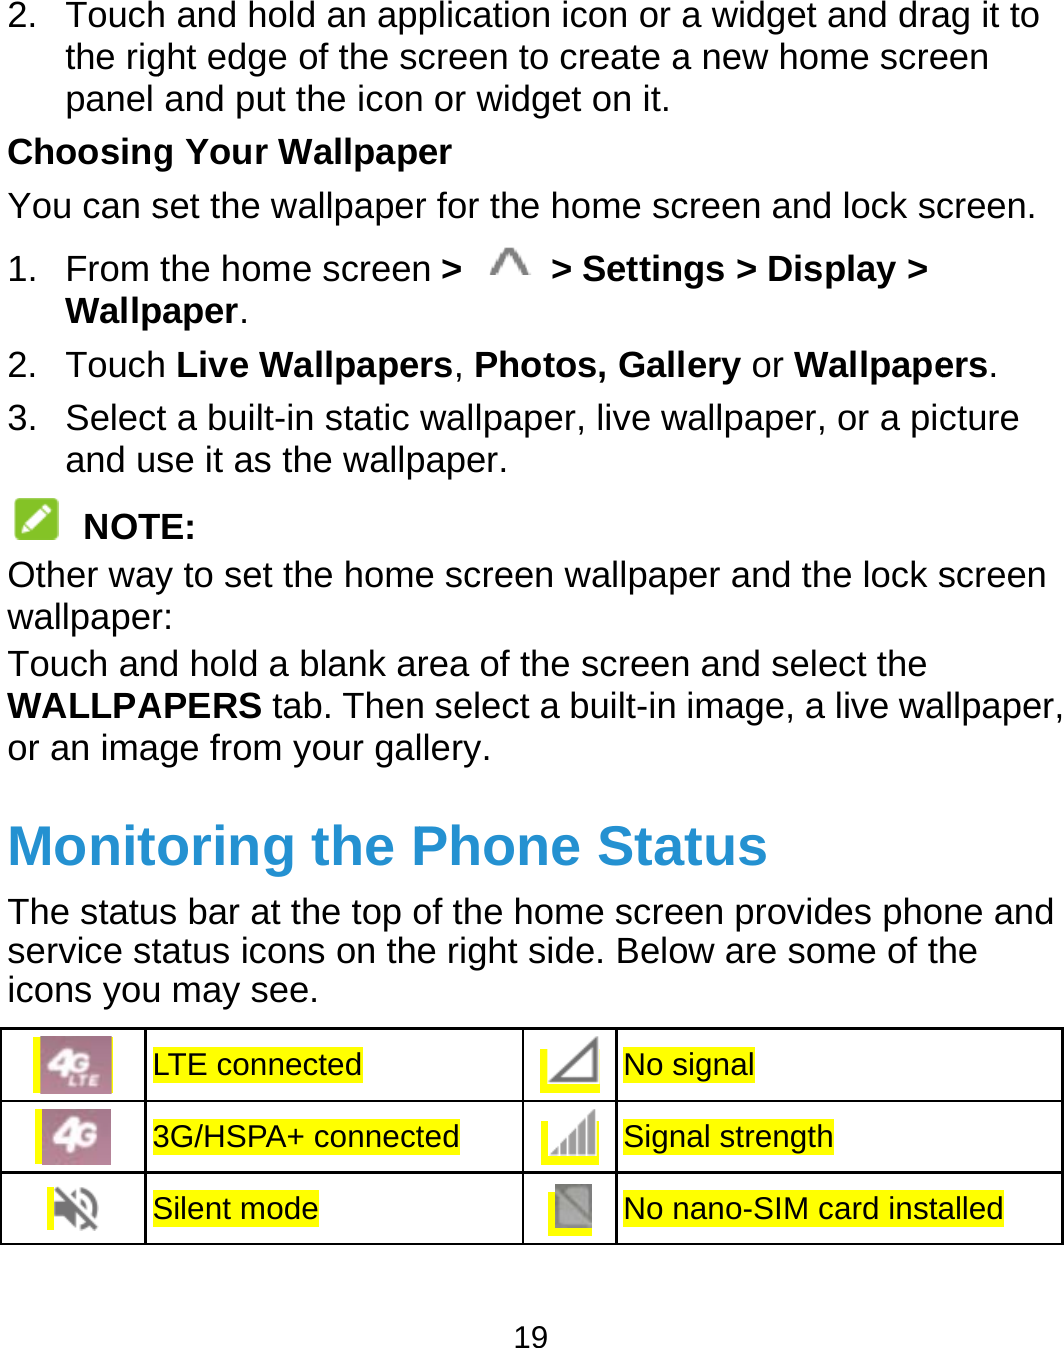  2. Touchthe rigpanel ChoosingYou can s1. From Wallp2. Touch3. Selectand us NOTOther waywallpaperTouch anWALLPAor an imaMonitThe statuservice sticons you L 3 Sh and hold an apght edge of the scand put the icong Your Wallpapeset the wallpaperthe home screenpaper. h Live Wallpapet a built-in static se it as the wallpTE: y to set the homer: d hold a blank arAPERS tab. Thenge from your galoring the Ps bar at the top otatus icons on theu may see.   LTE connected 3G/HSPA+ connectSilent mode 19 plication icon or creen to create an or widget on it.er r for the home scn &gt;   &gt; Settinrs, Photos, Gallwallpaper, live wpaper. e screen wallpaprea of the screenn select a built-in llery. Phone Staof the home scree right side. BeloNo sted  SignNo na widget and draa new home screcreen and lock scngs &gt; Display &gt; lery or Wallpapewallpaper, or a picper and the lock sn and select the image, a live waatus een provides phoow are some of thsignal nal strength nano-SIM card instaag it to een creen. ers. cture screen allpaper, ne and he alled 